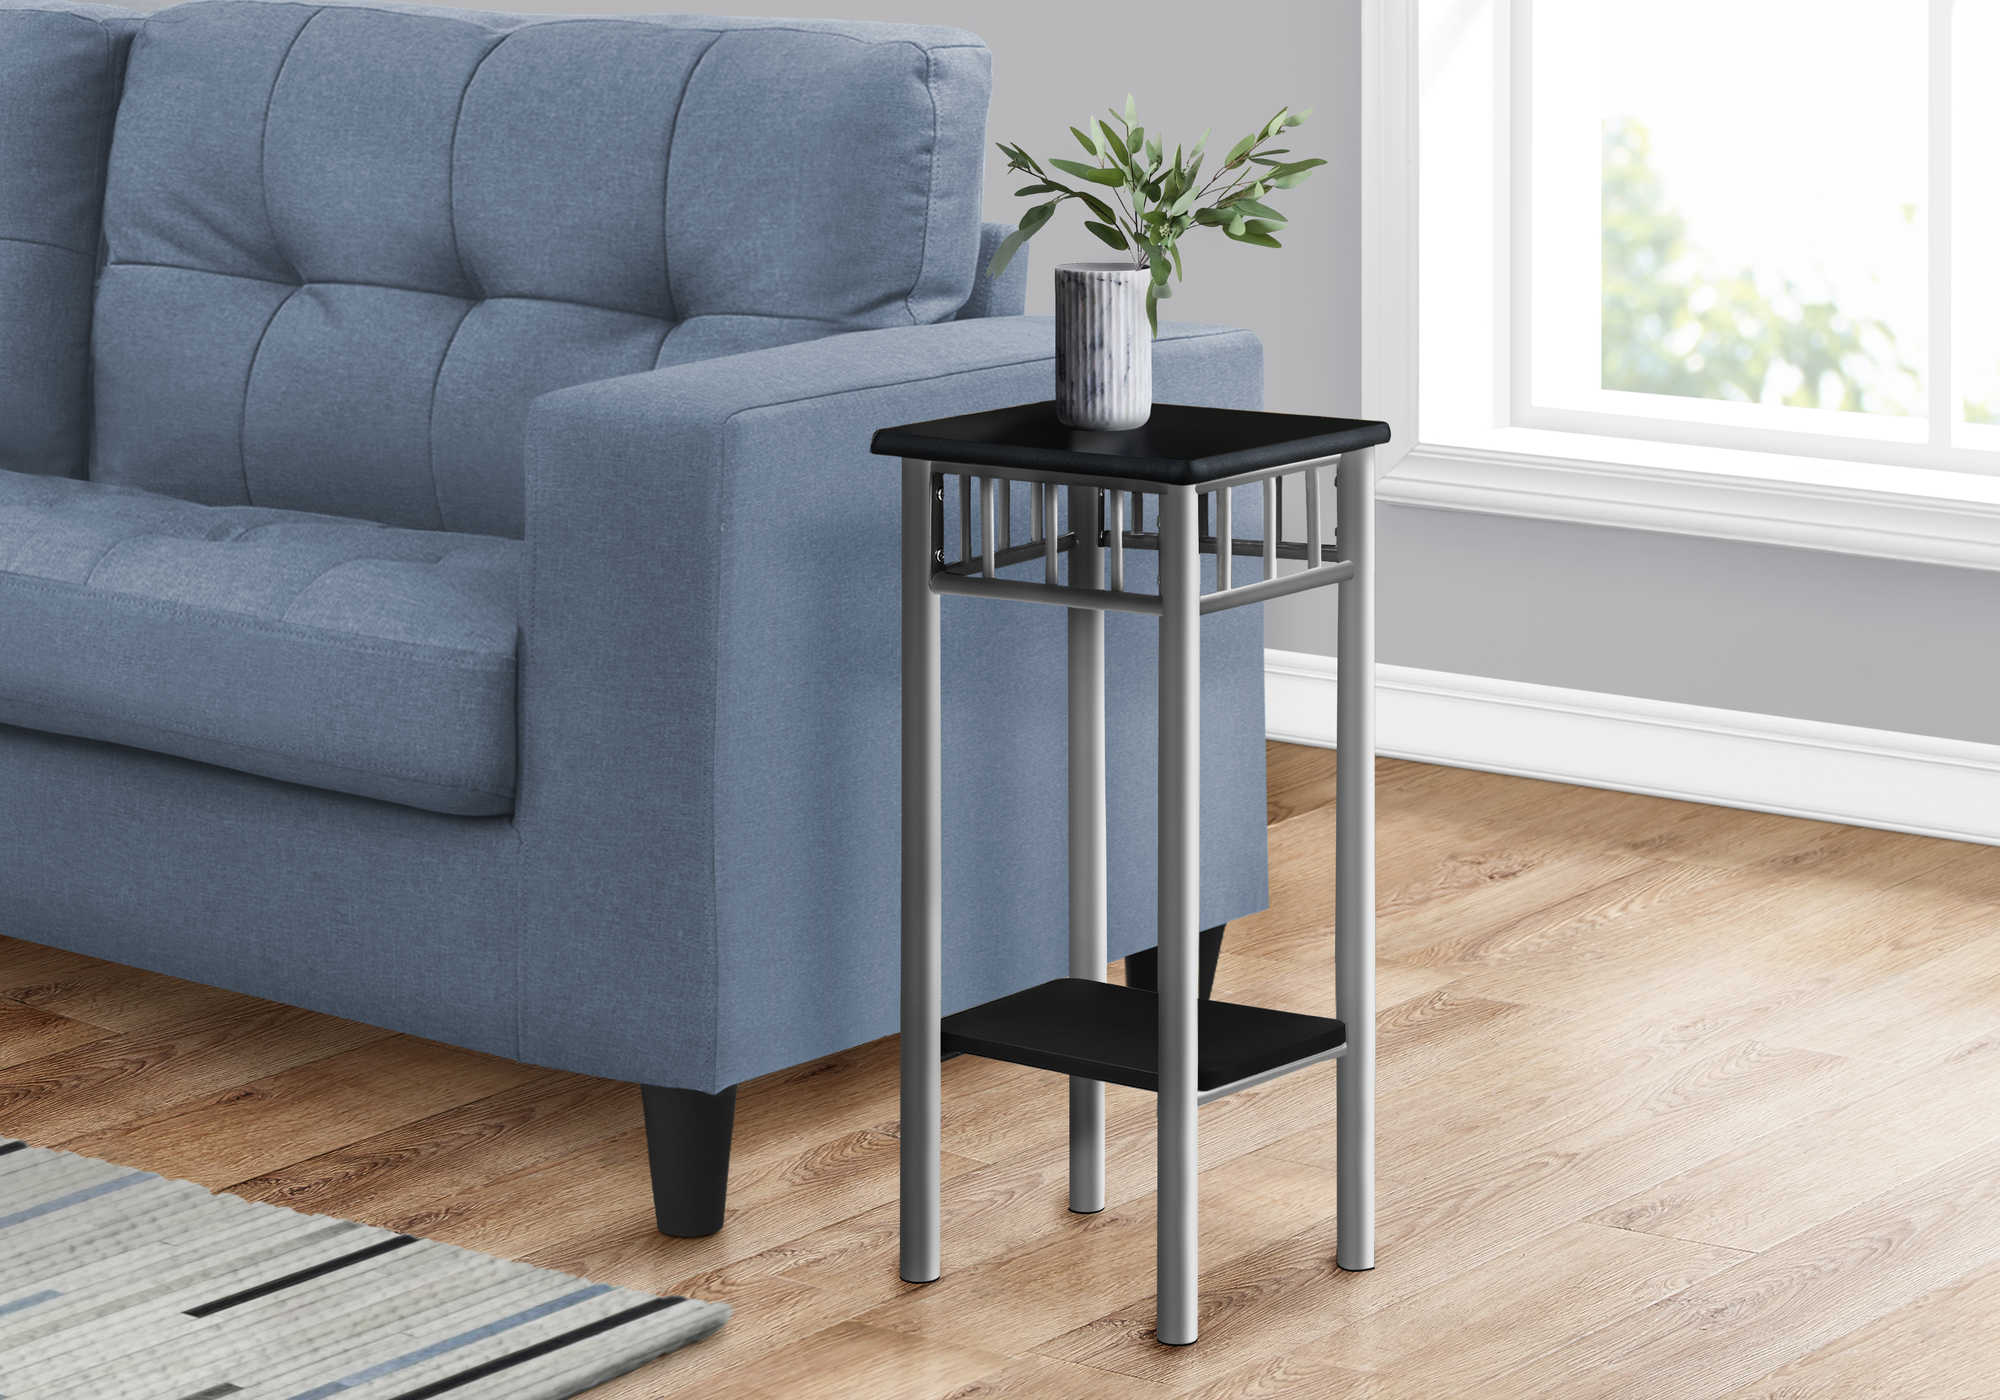 ACCENT TABLE - BLACK / SILVER METAL 